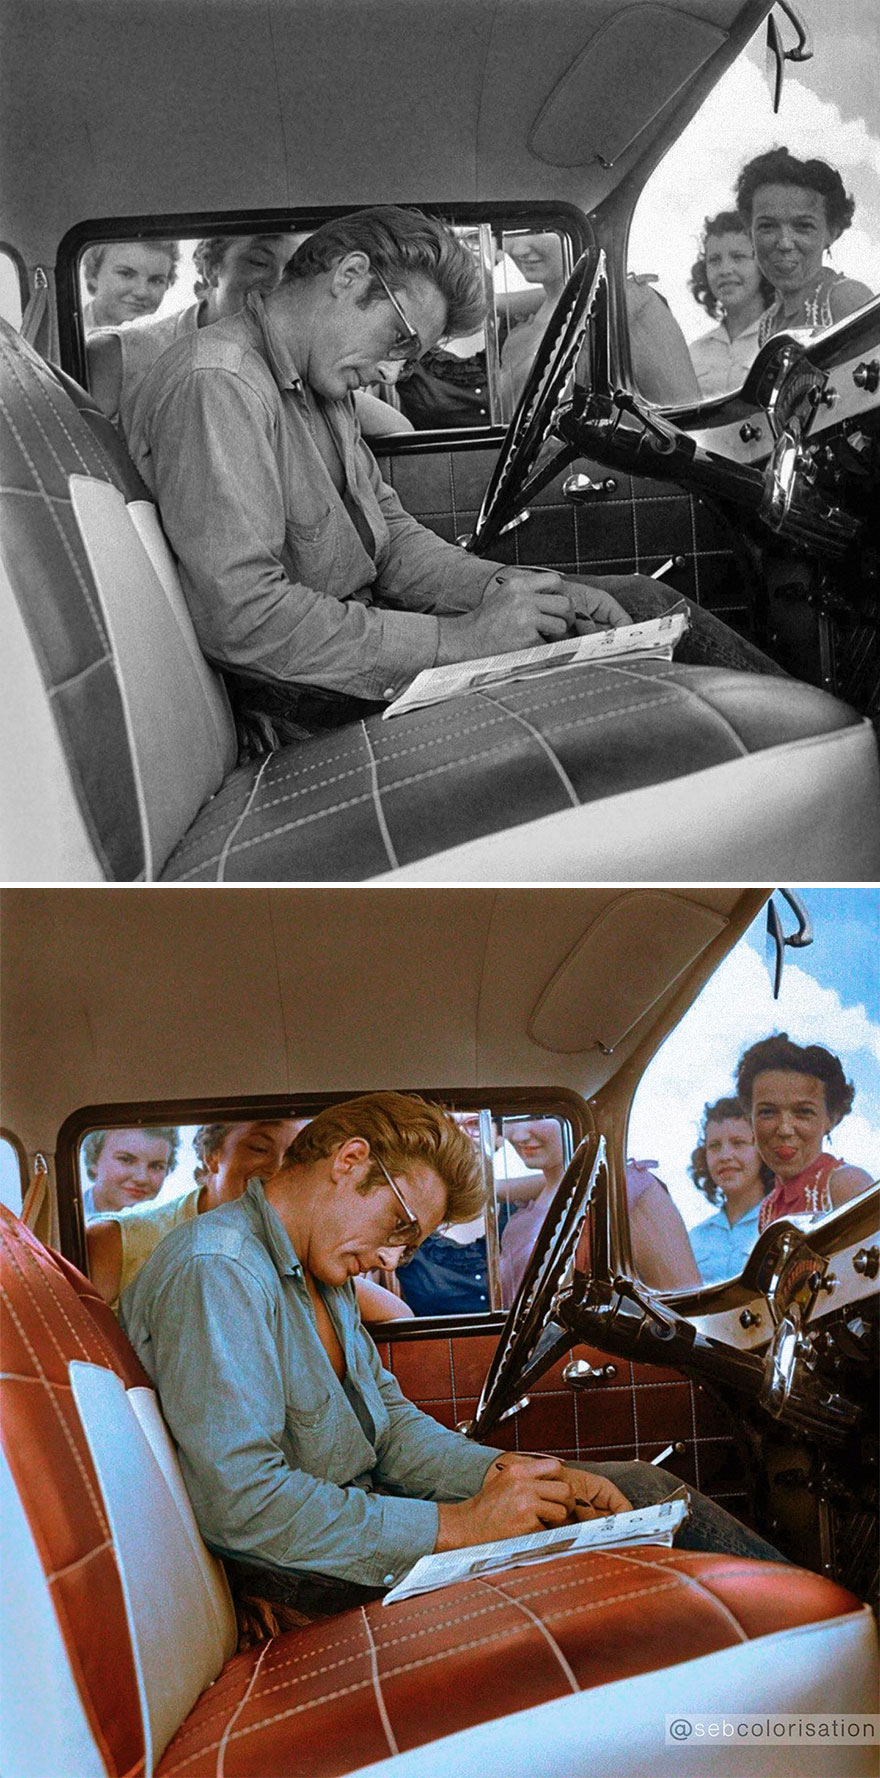 James Dean Signs Autographs In His Car In Marfa, Texas, Photographed By Richard C. Miller, In July 1955